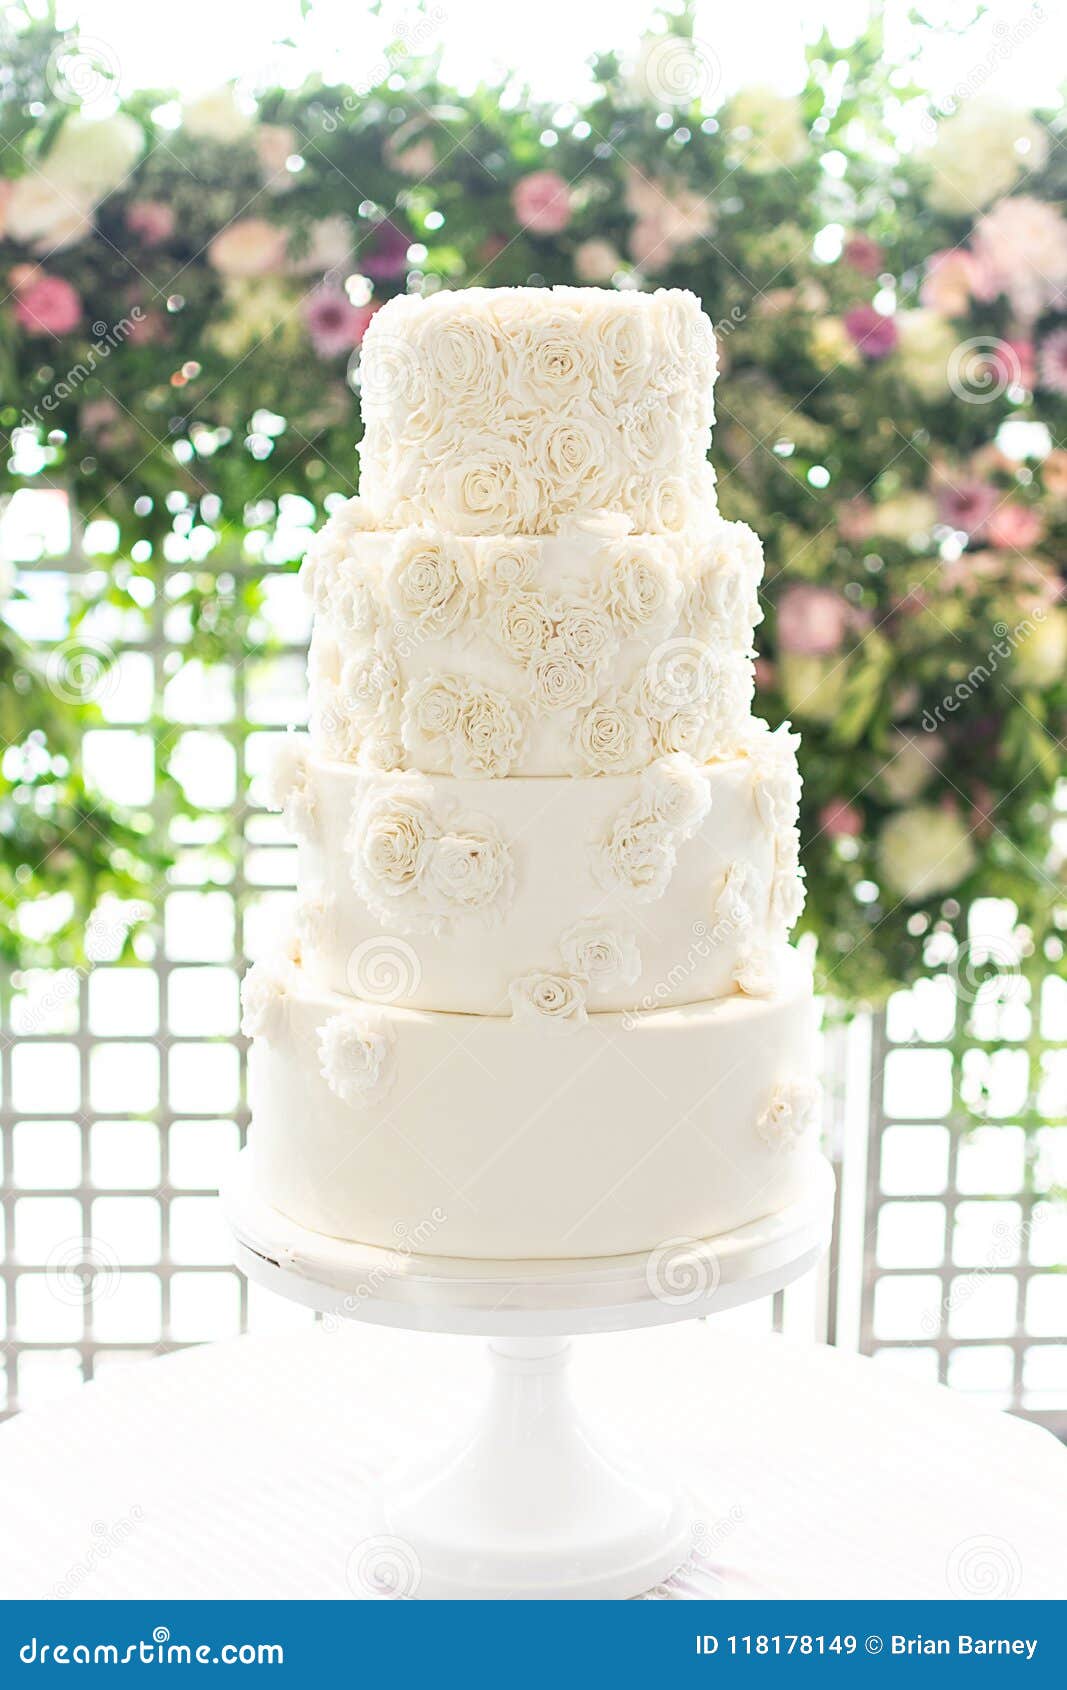 4 Tier White Wedding  Cake  With Rosette Embellishments  And 